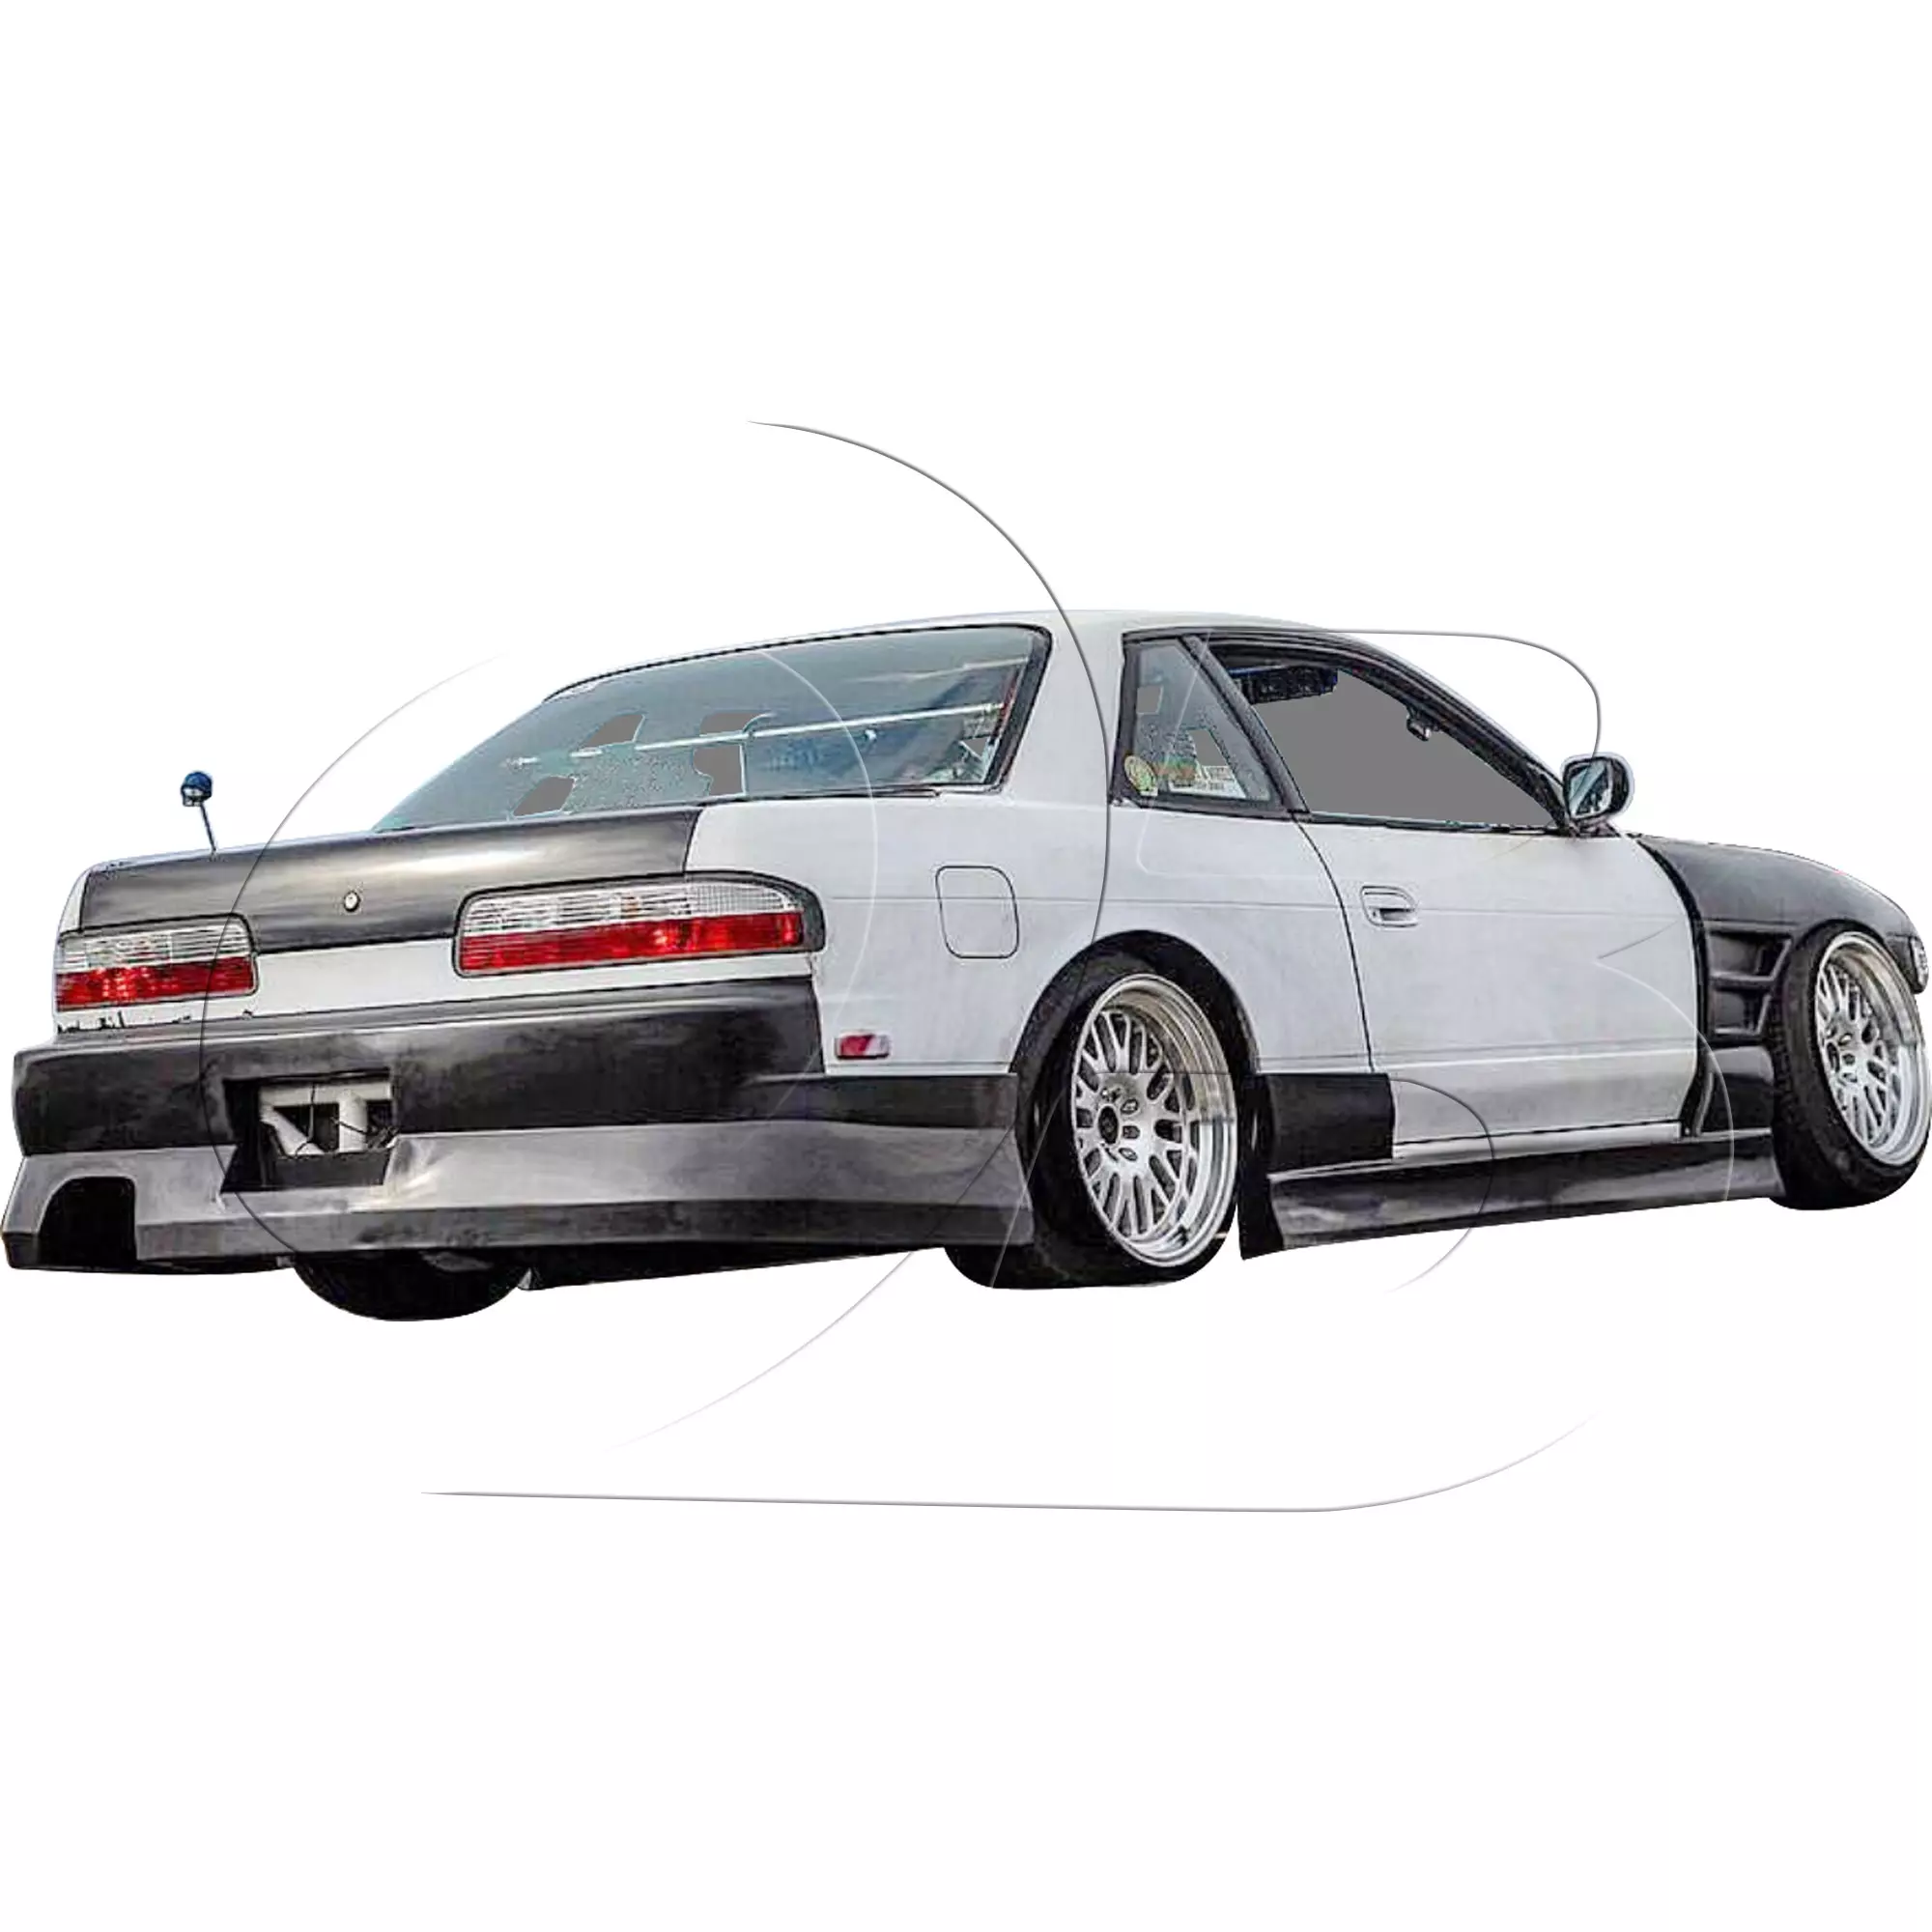 KBD Urethane Bsport2 Style 4pc Full Body Kit > Nissan 240SX 1989-1994 > 2dr Coupe - Image 113